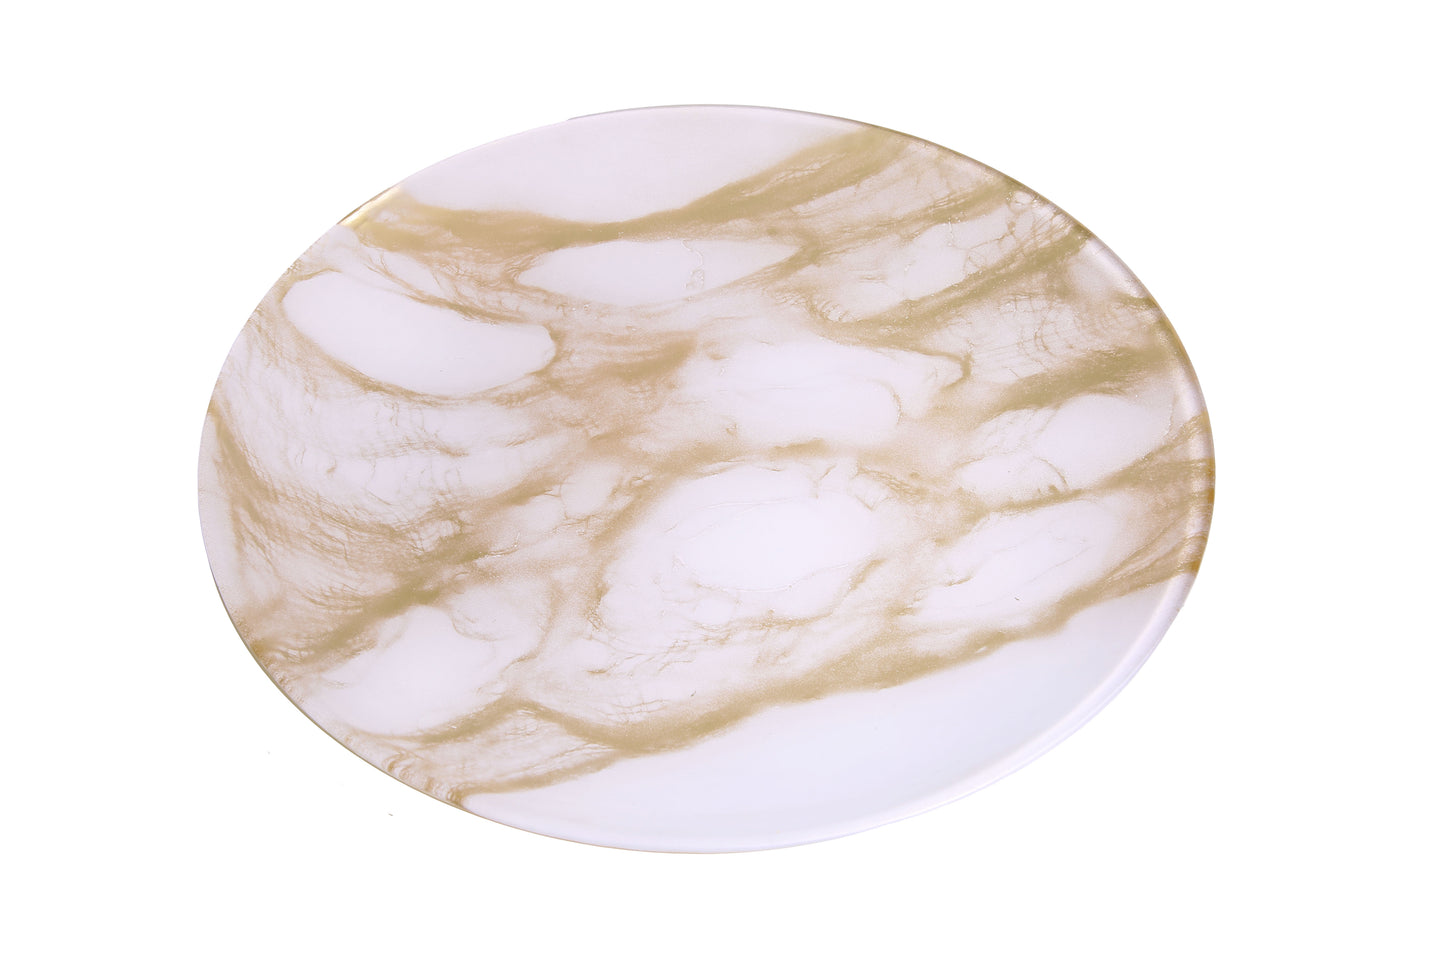 Set Of 4 Gold-White Marble Plates - 8.25